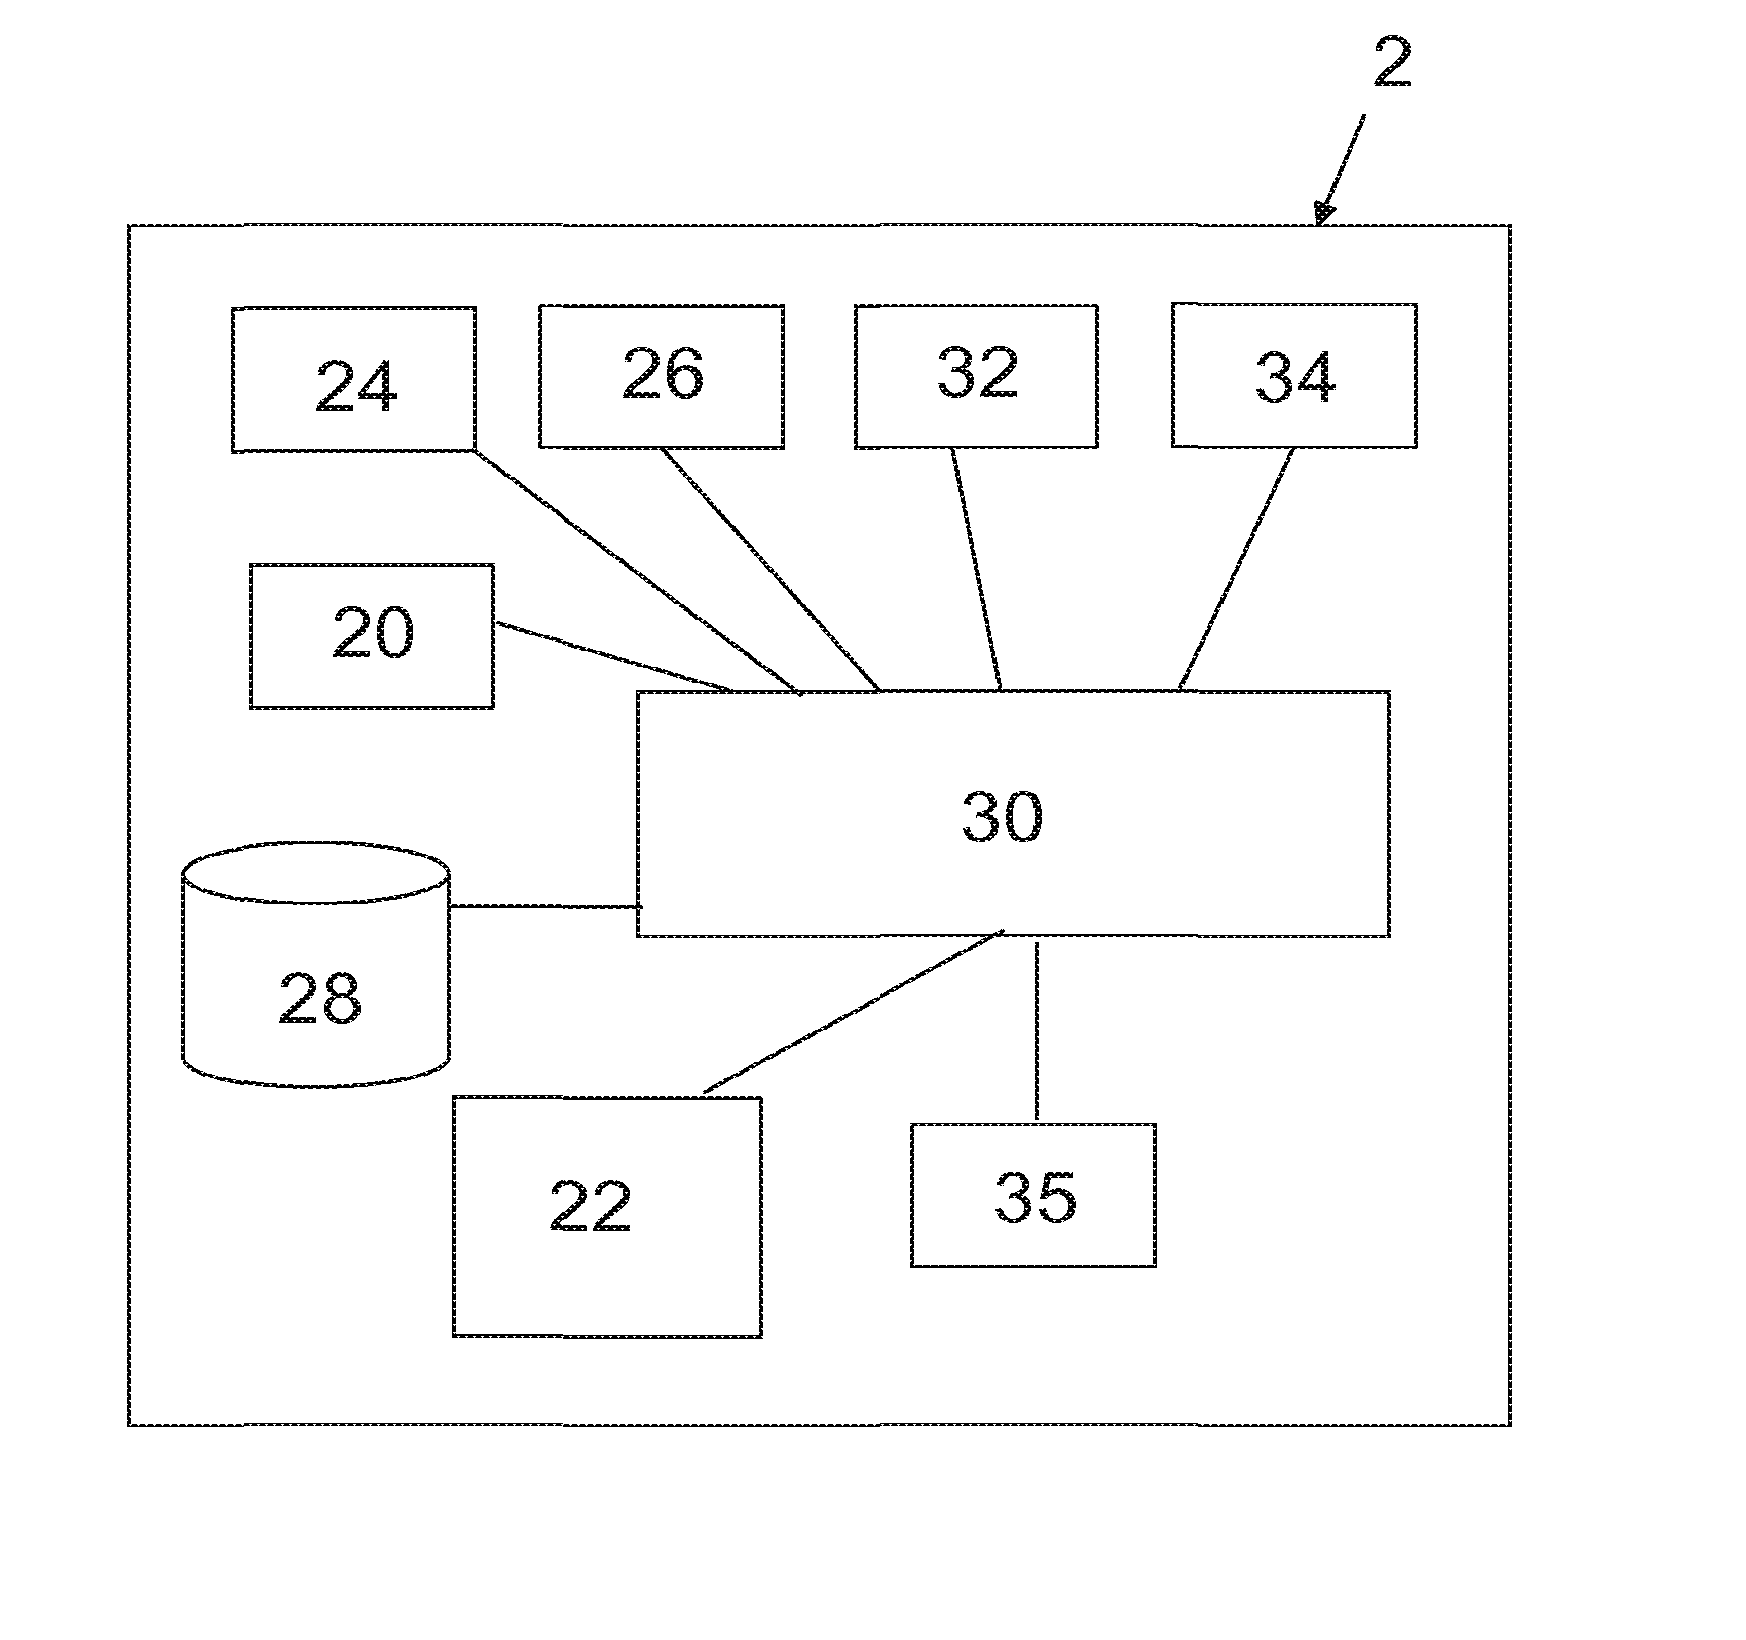 Radio positioning of a mobile receiver using a virtual positioning reference